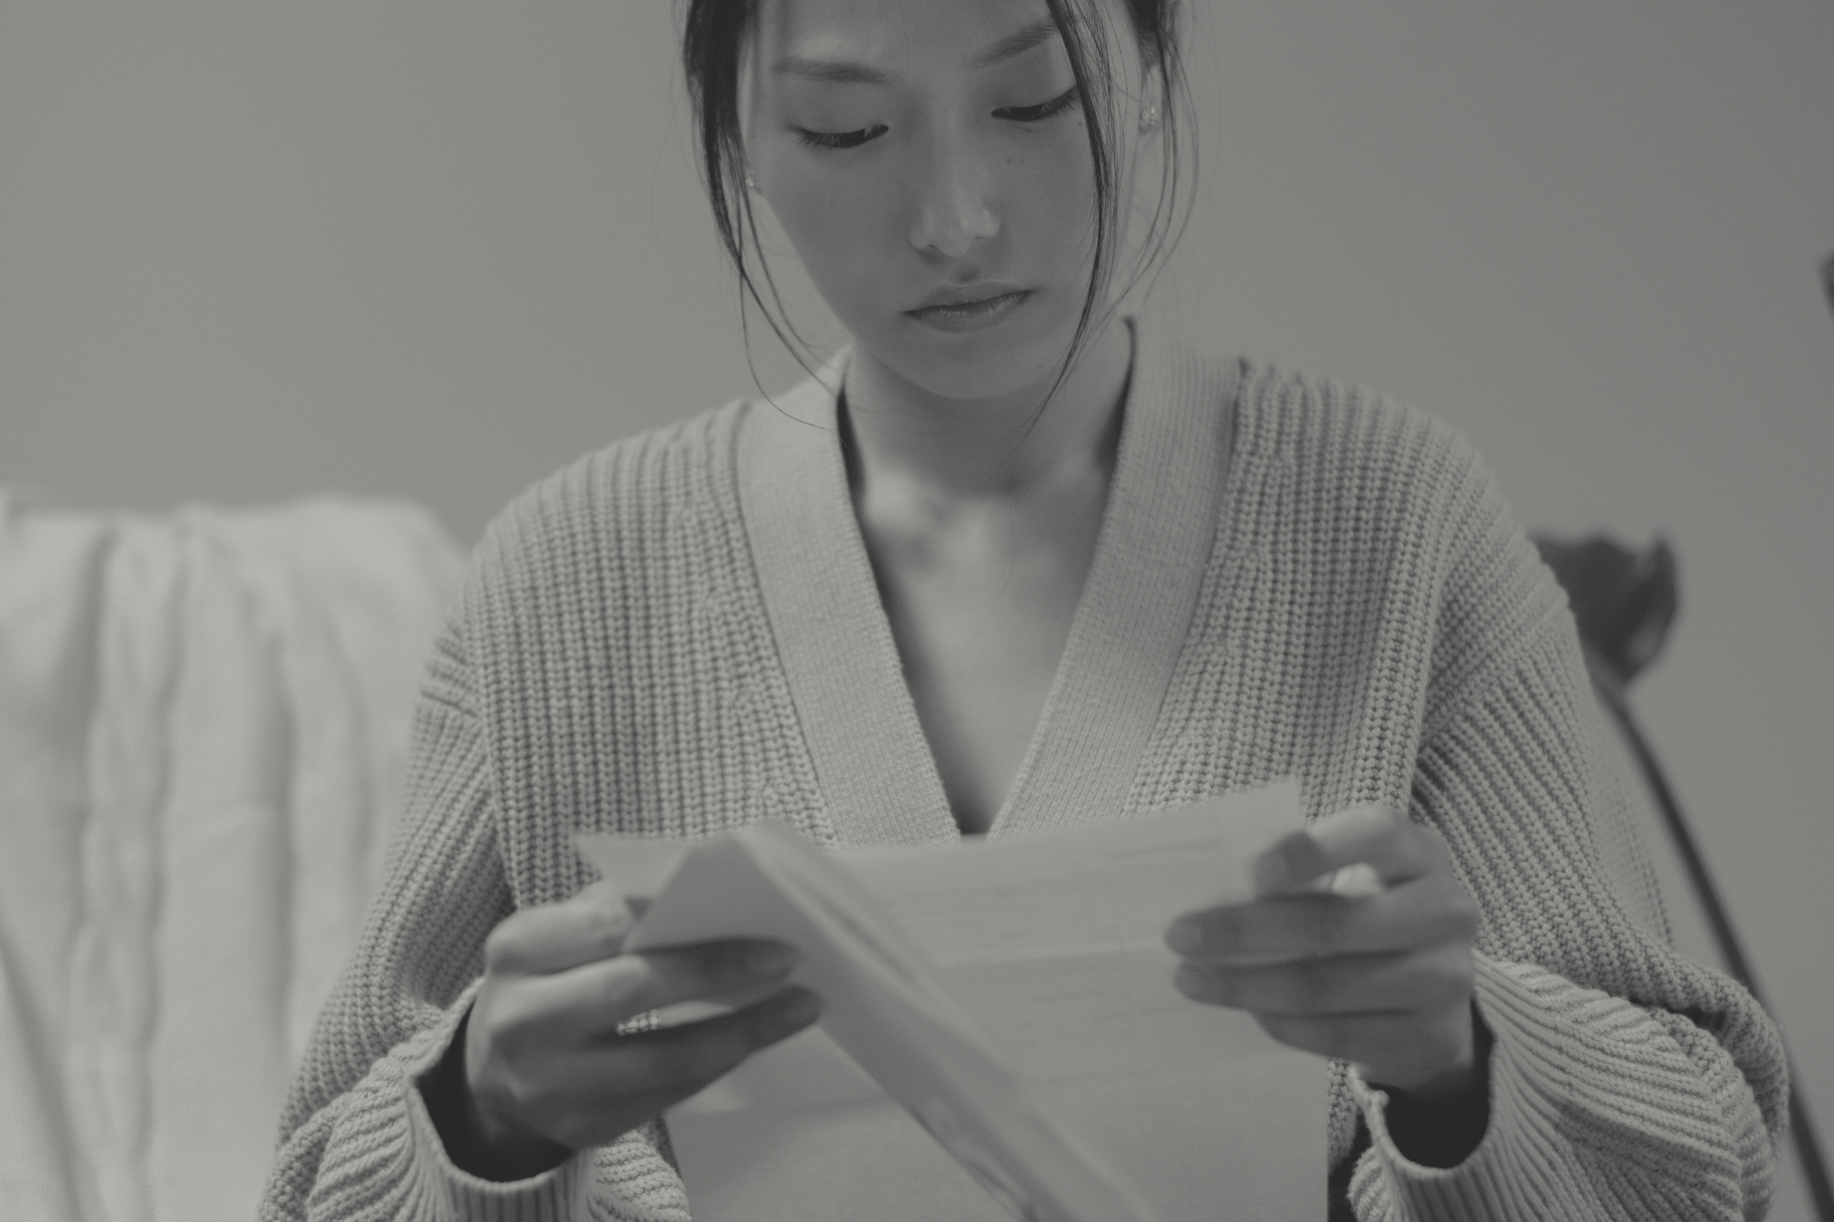 A woman is sitting and reading a letter. She has a fixed expression and is looking down at the letter in her hands.